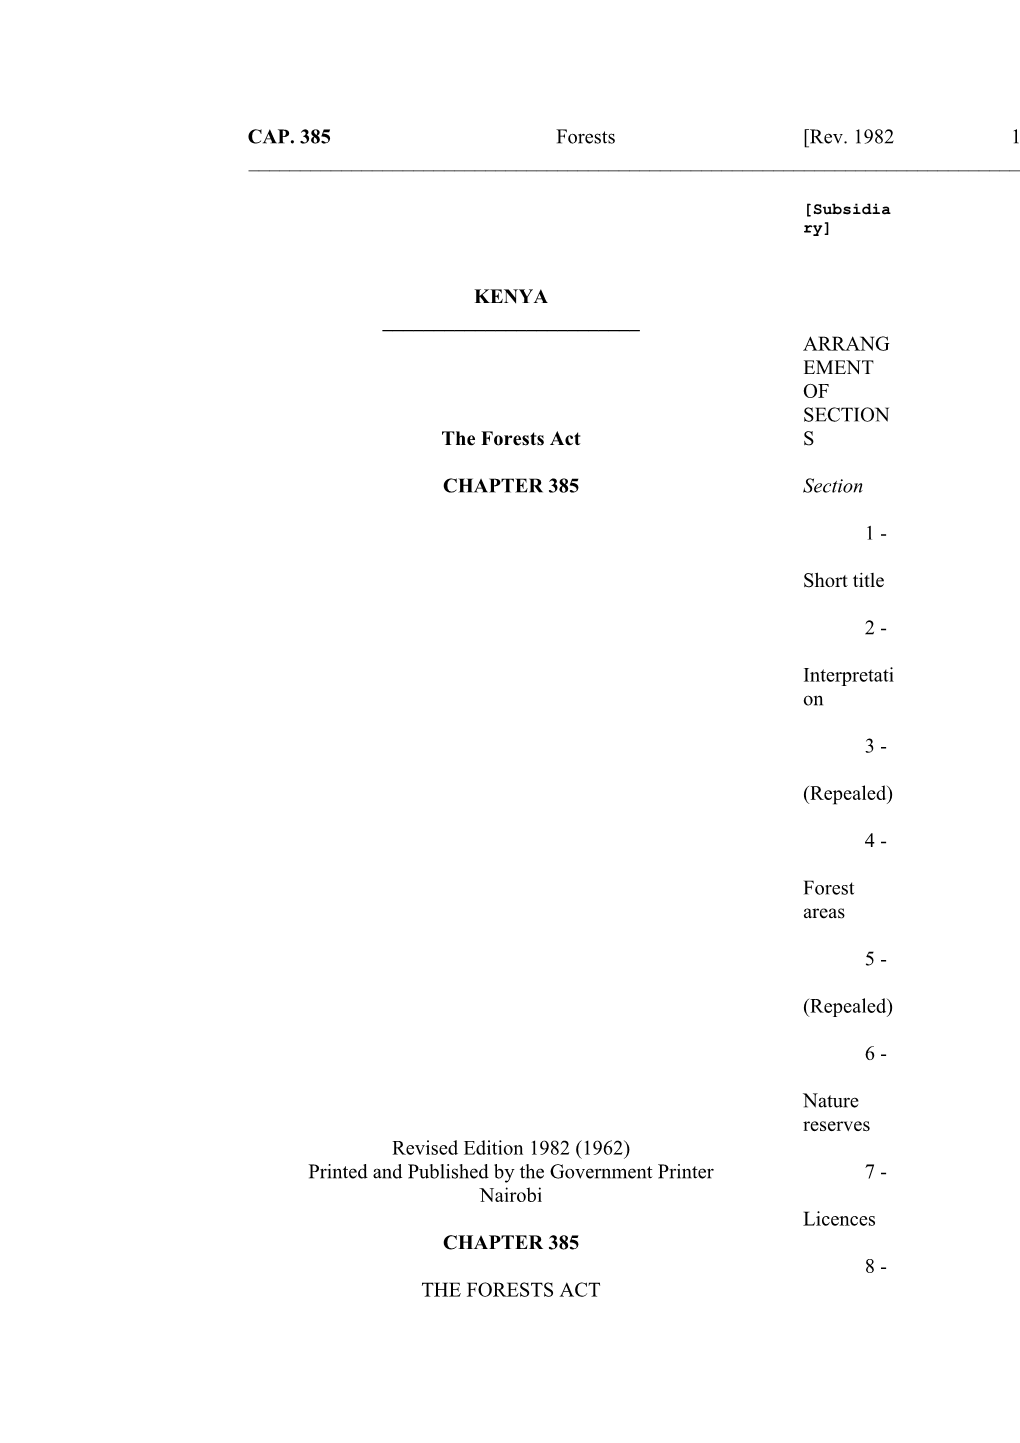 Printed and Published by the Government Printer